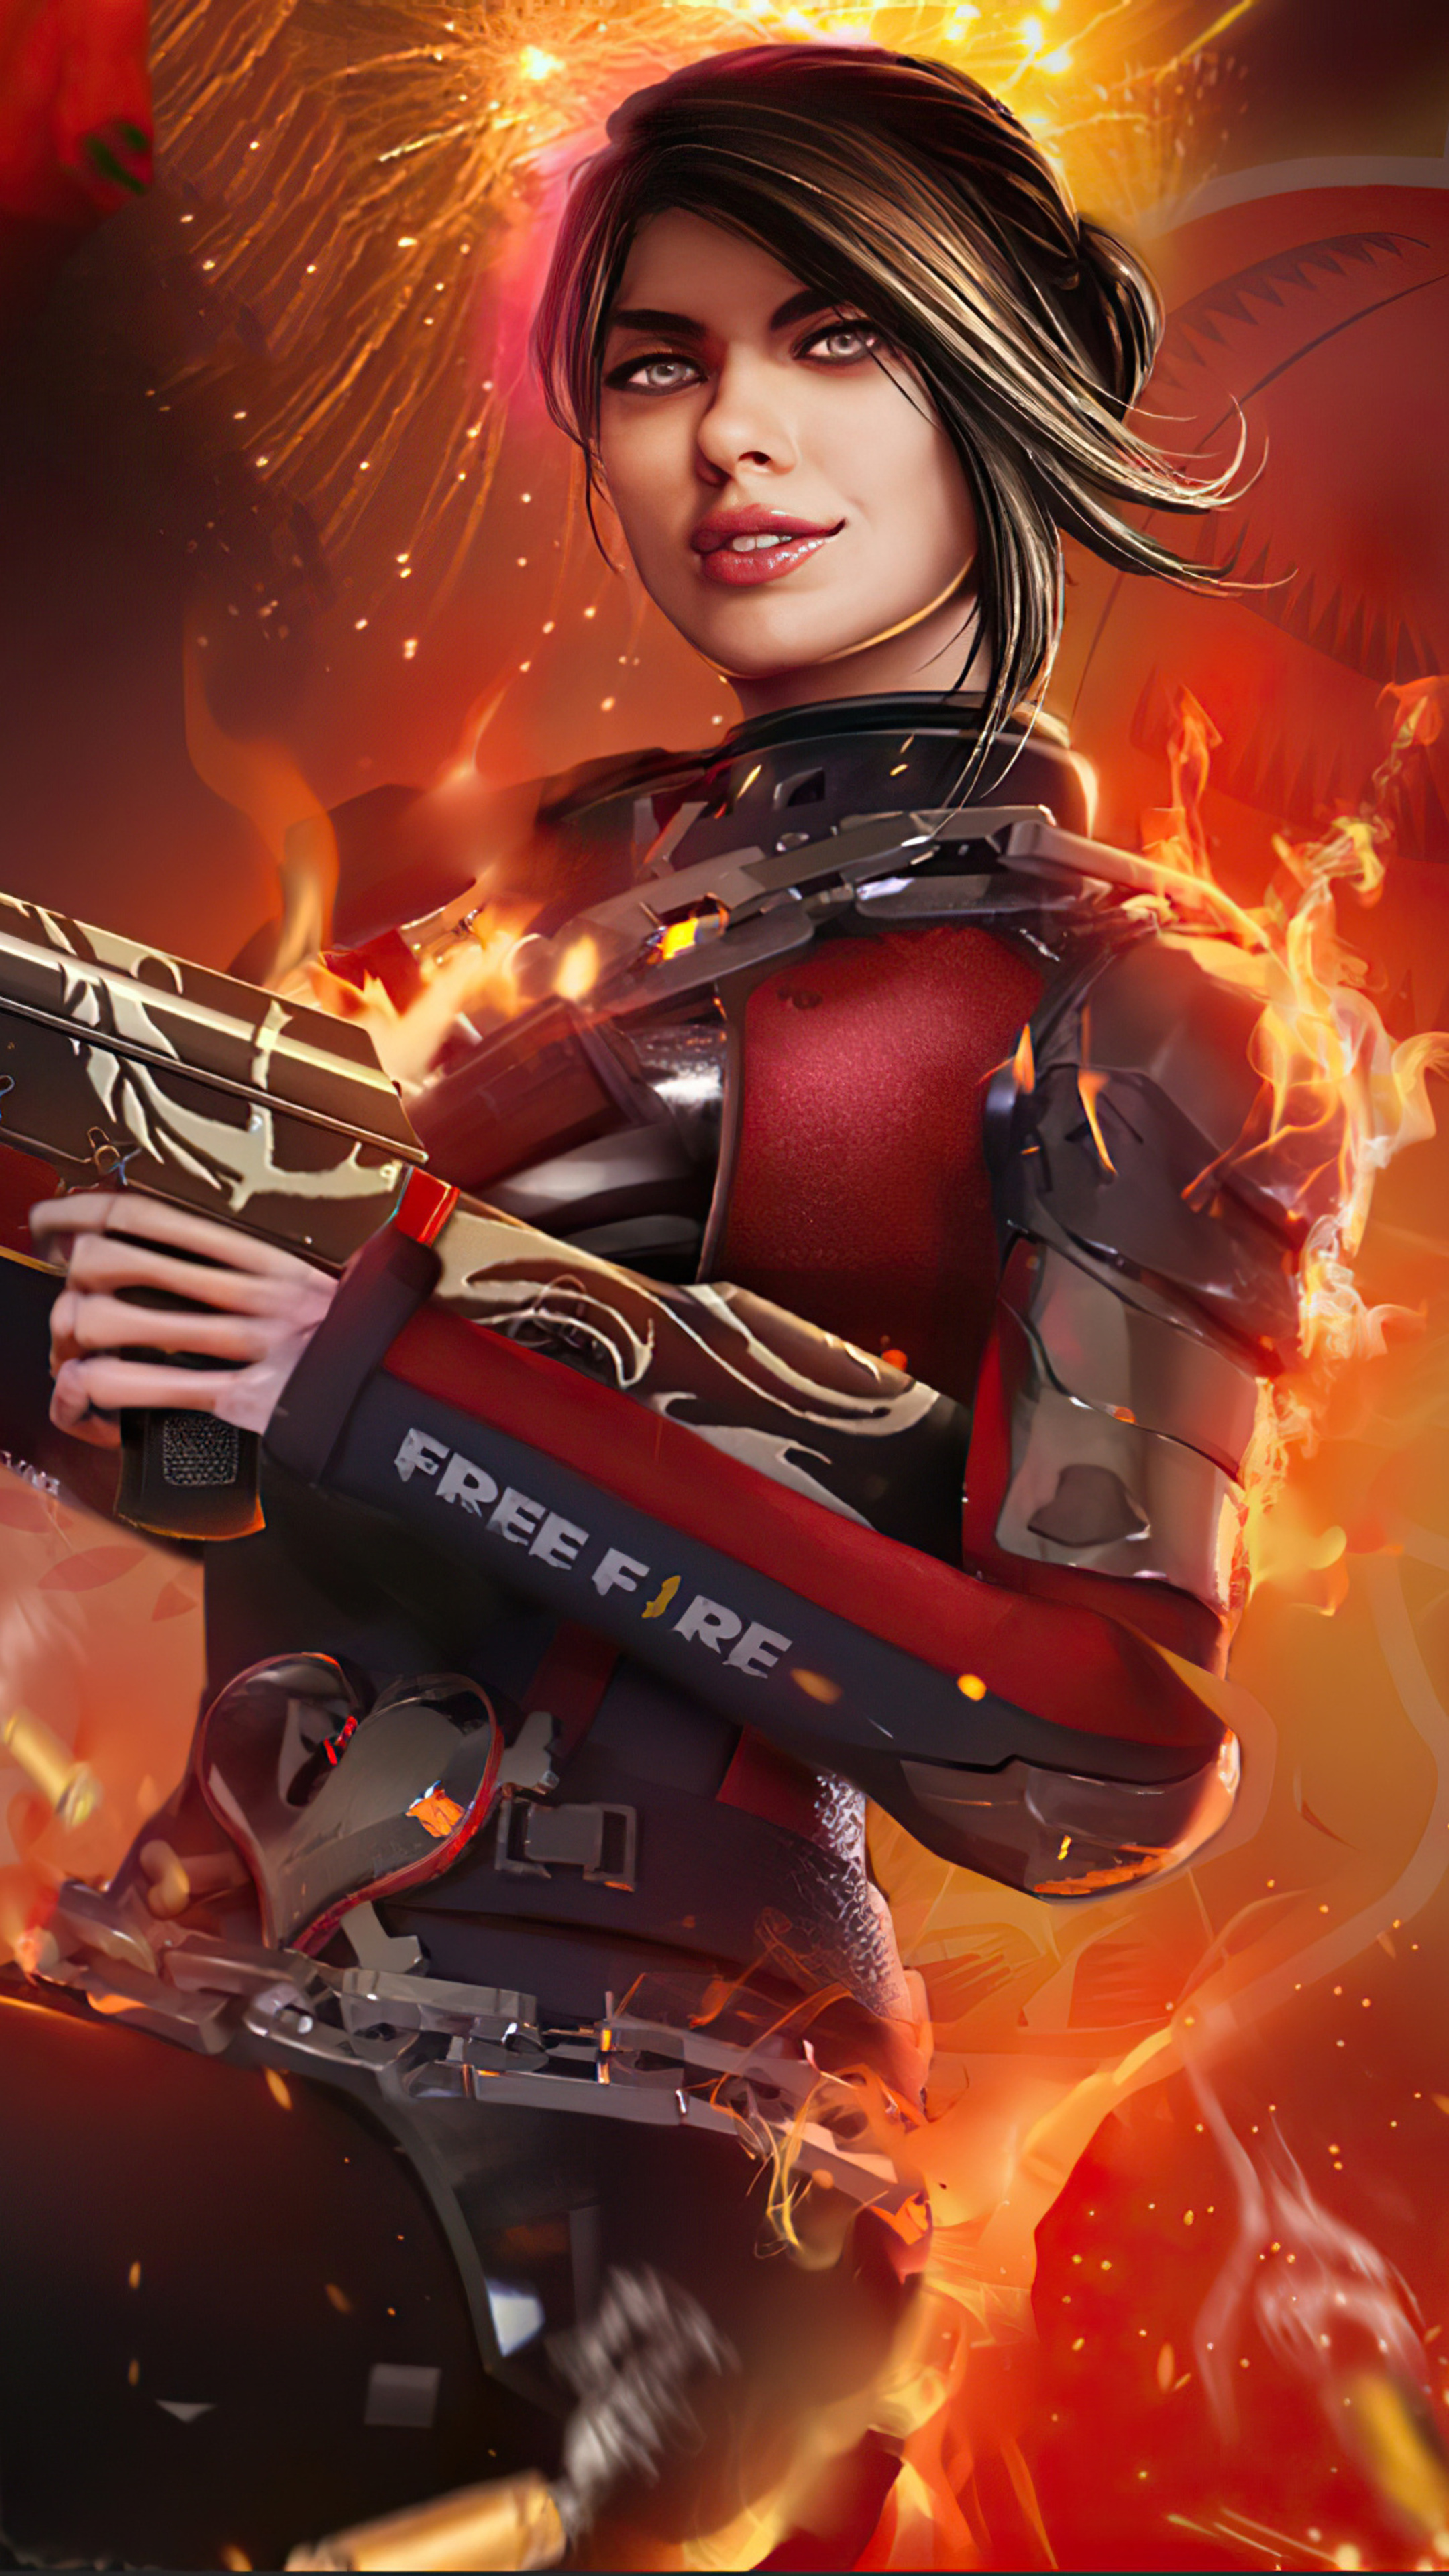 Garena Free Fire, 4K game, Sony Xperia, HD wallpapers, 2160x3840 4K Handy